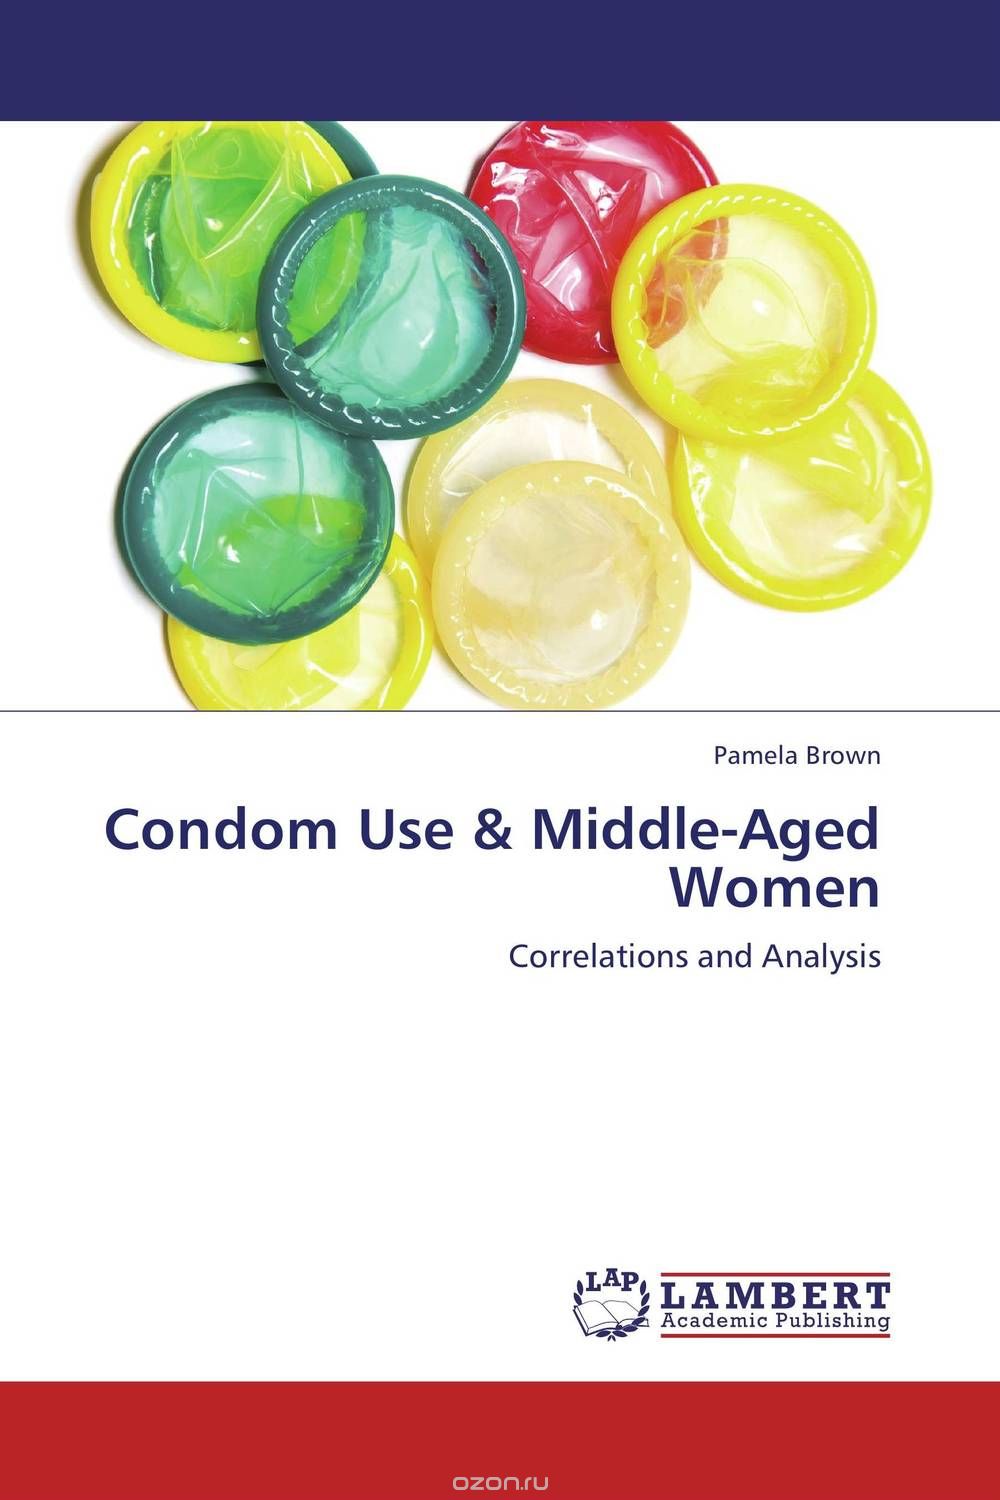 Condom Use & Middle-Aged Women